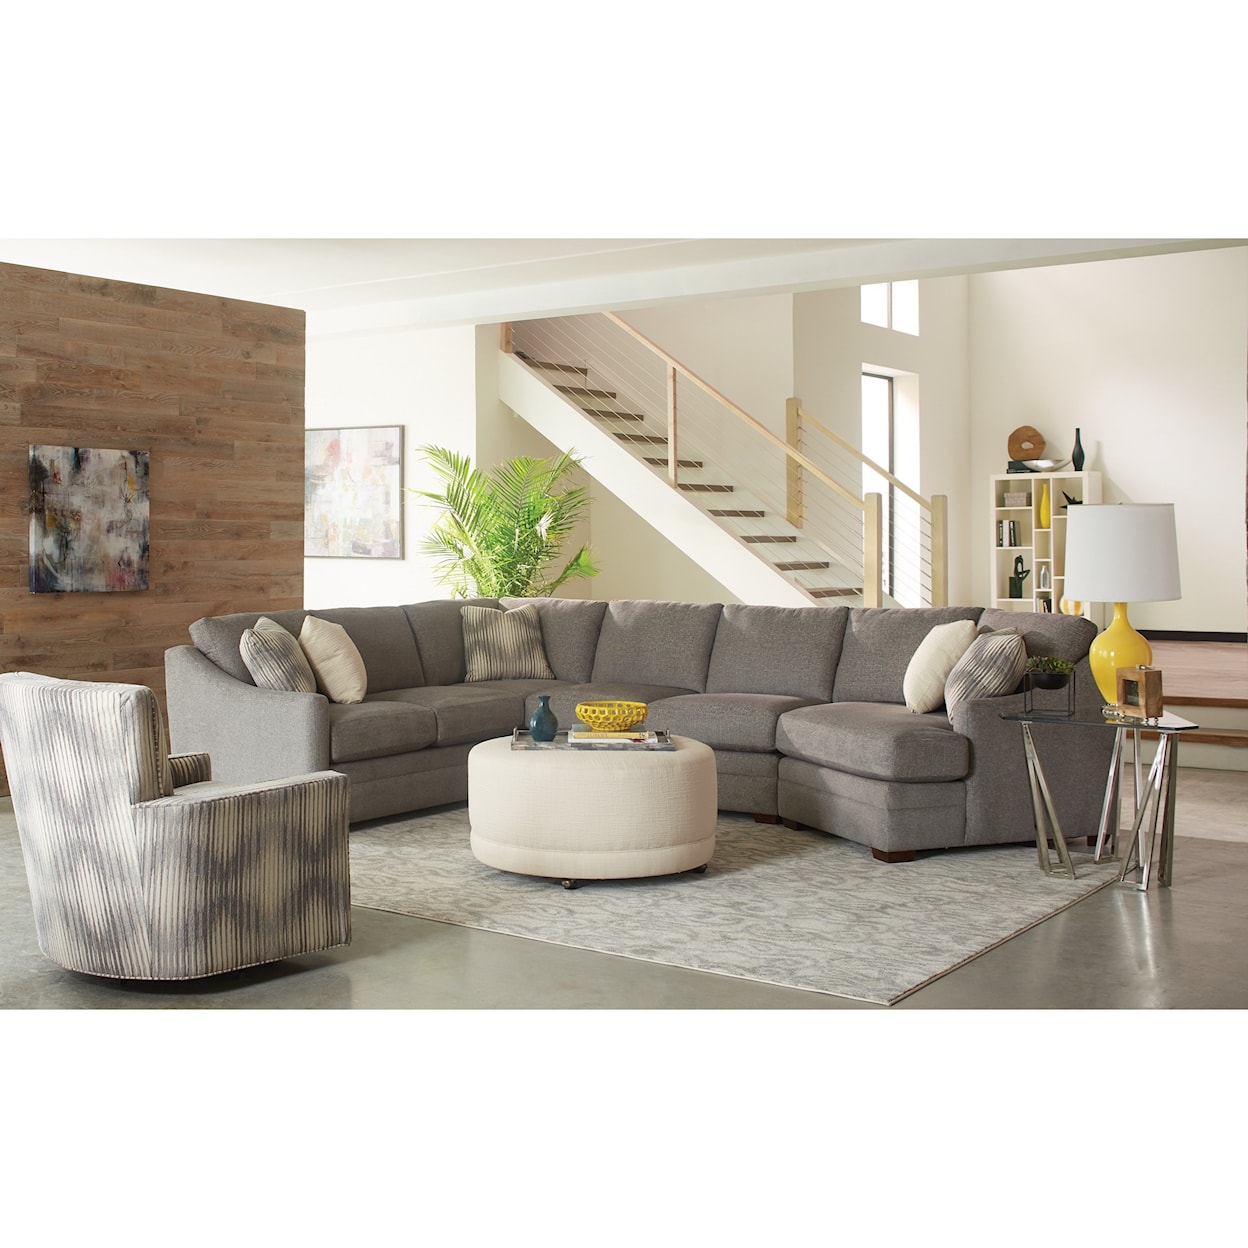 Craftmaster F9 Custom Collection 3 pc Sectional Sofa